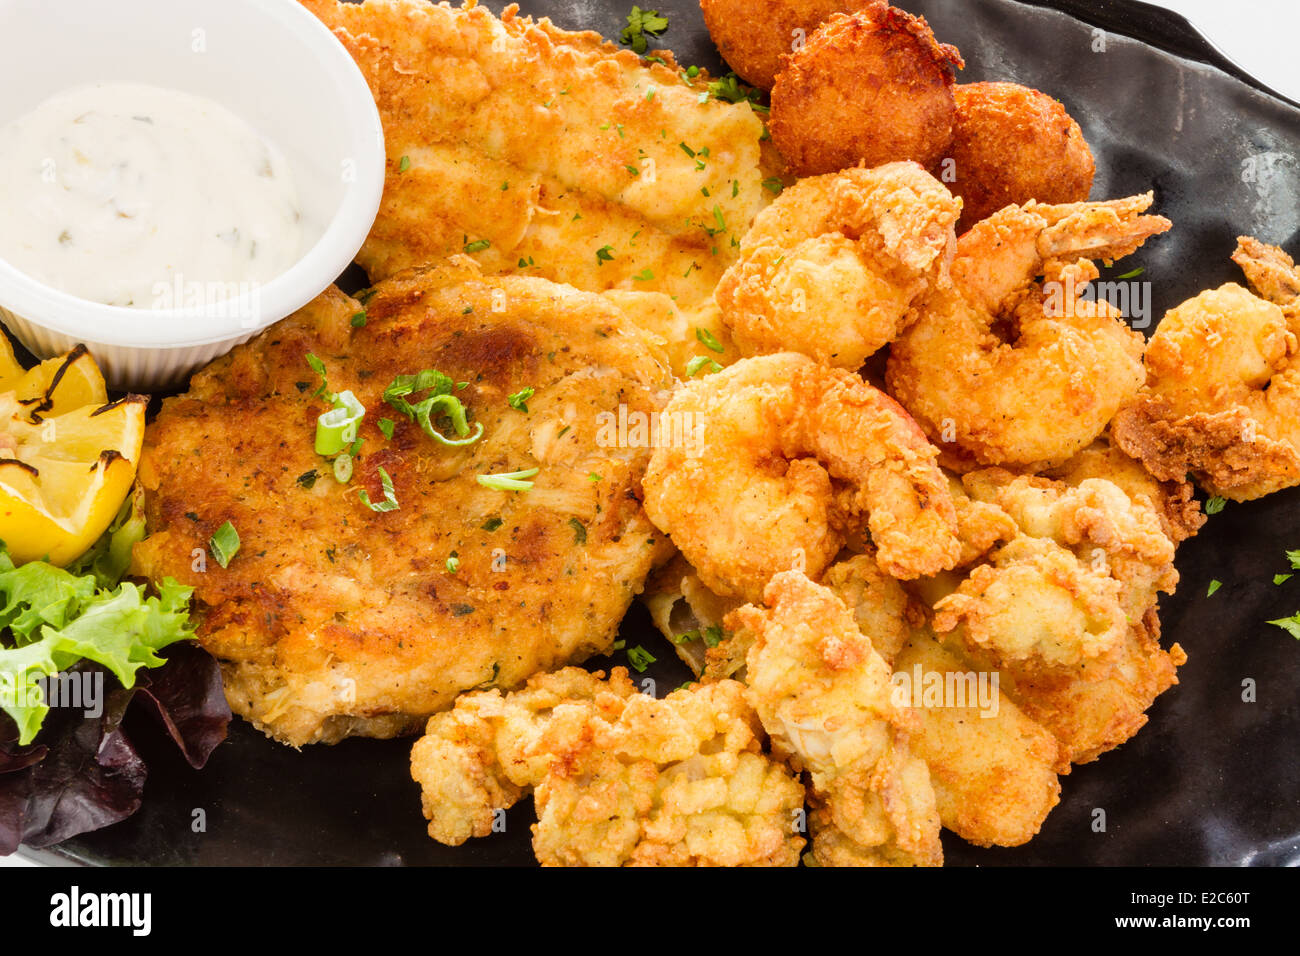 Fried seafood platter with fish, shrimp, oysters, hush puppies, and a crab cake. Stock Photo